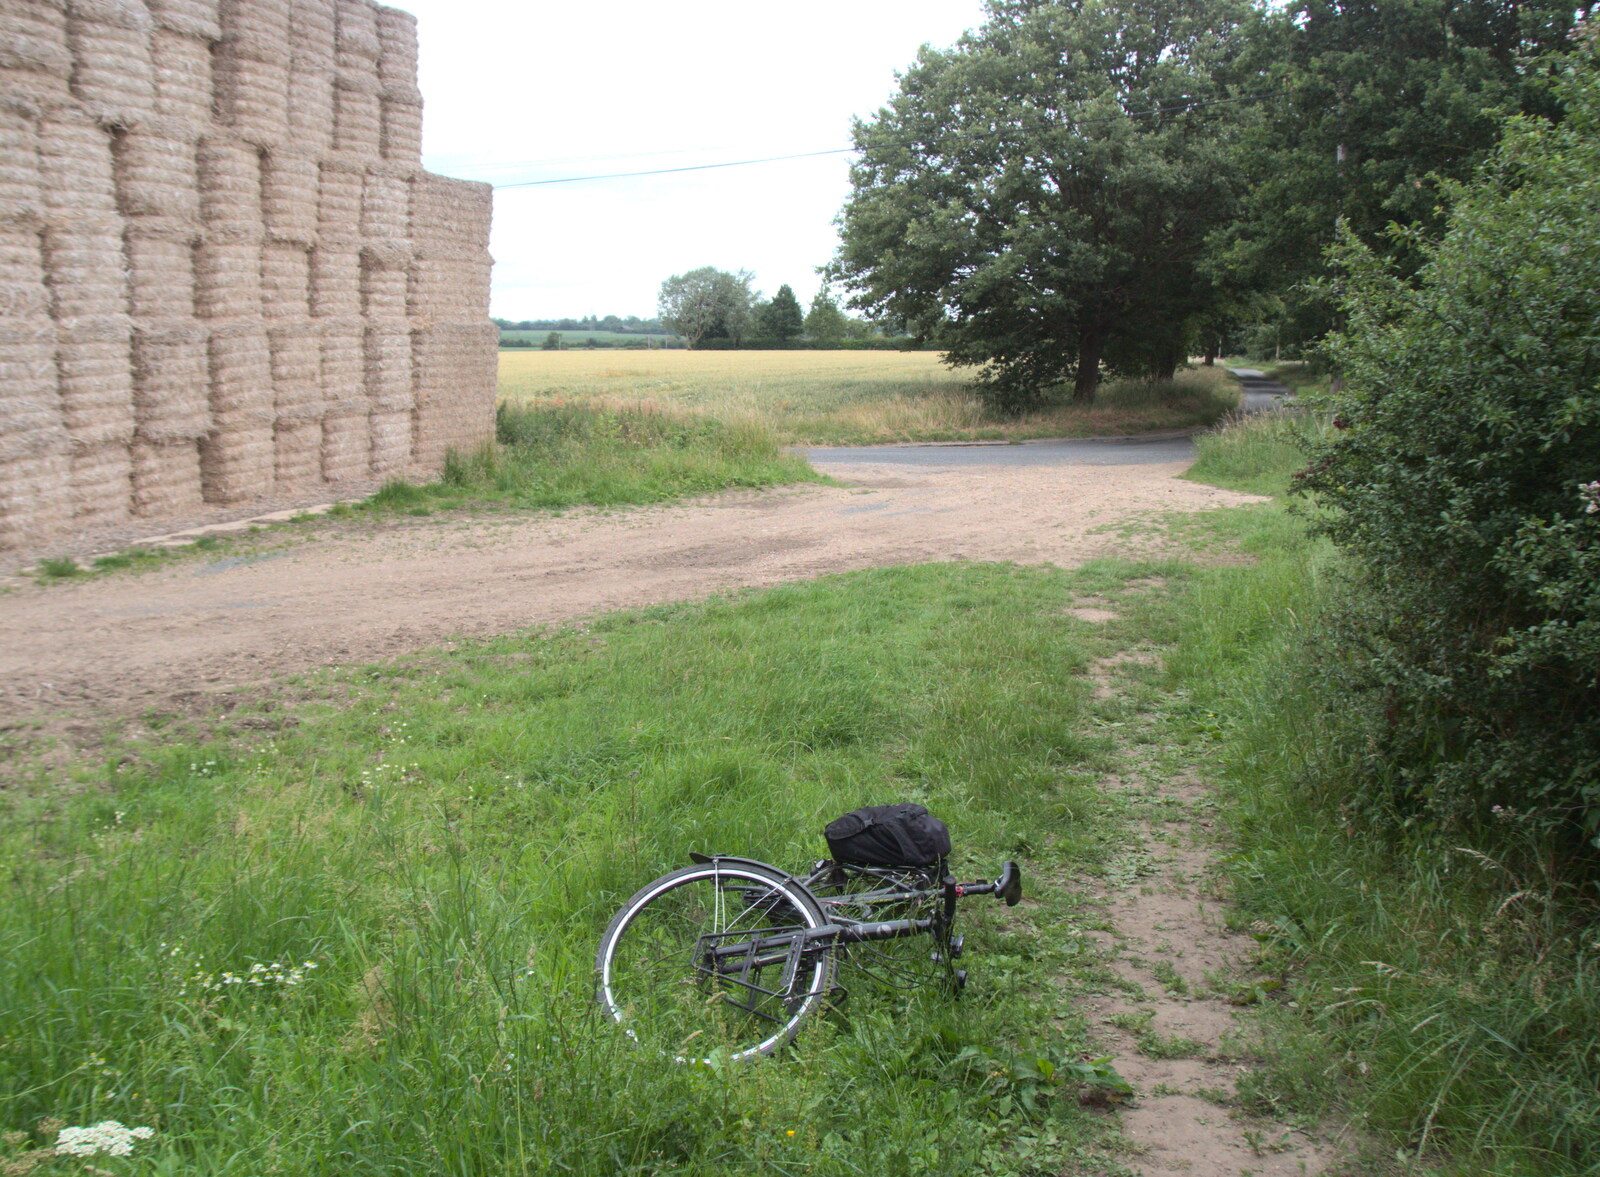 Nosher's bike is abandoned for a wee stop from Lockdown Bike Rides and an Anniversary Picnic, Mellis and Brome, Suffolk - 3rd July 2020